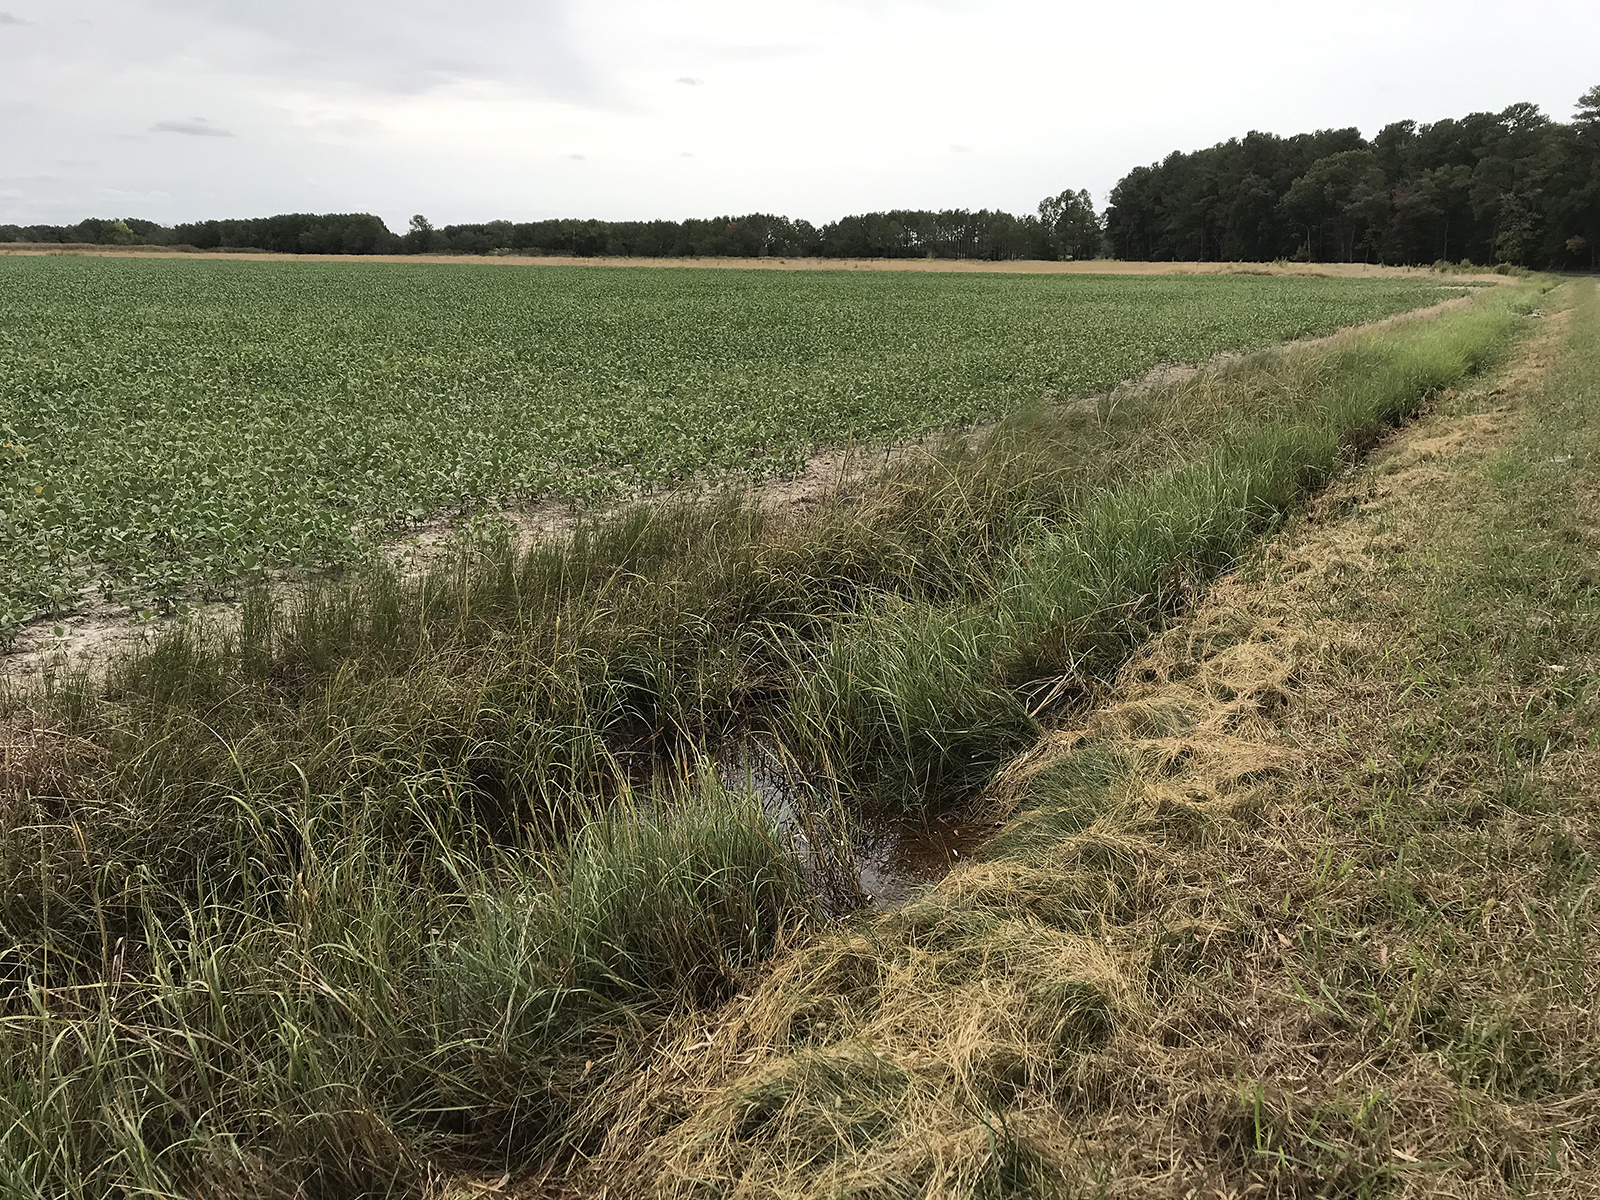 Soybean field adjacent to brackish water ditch with no conservation buffer